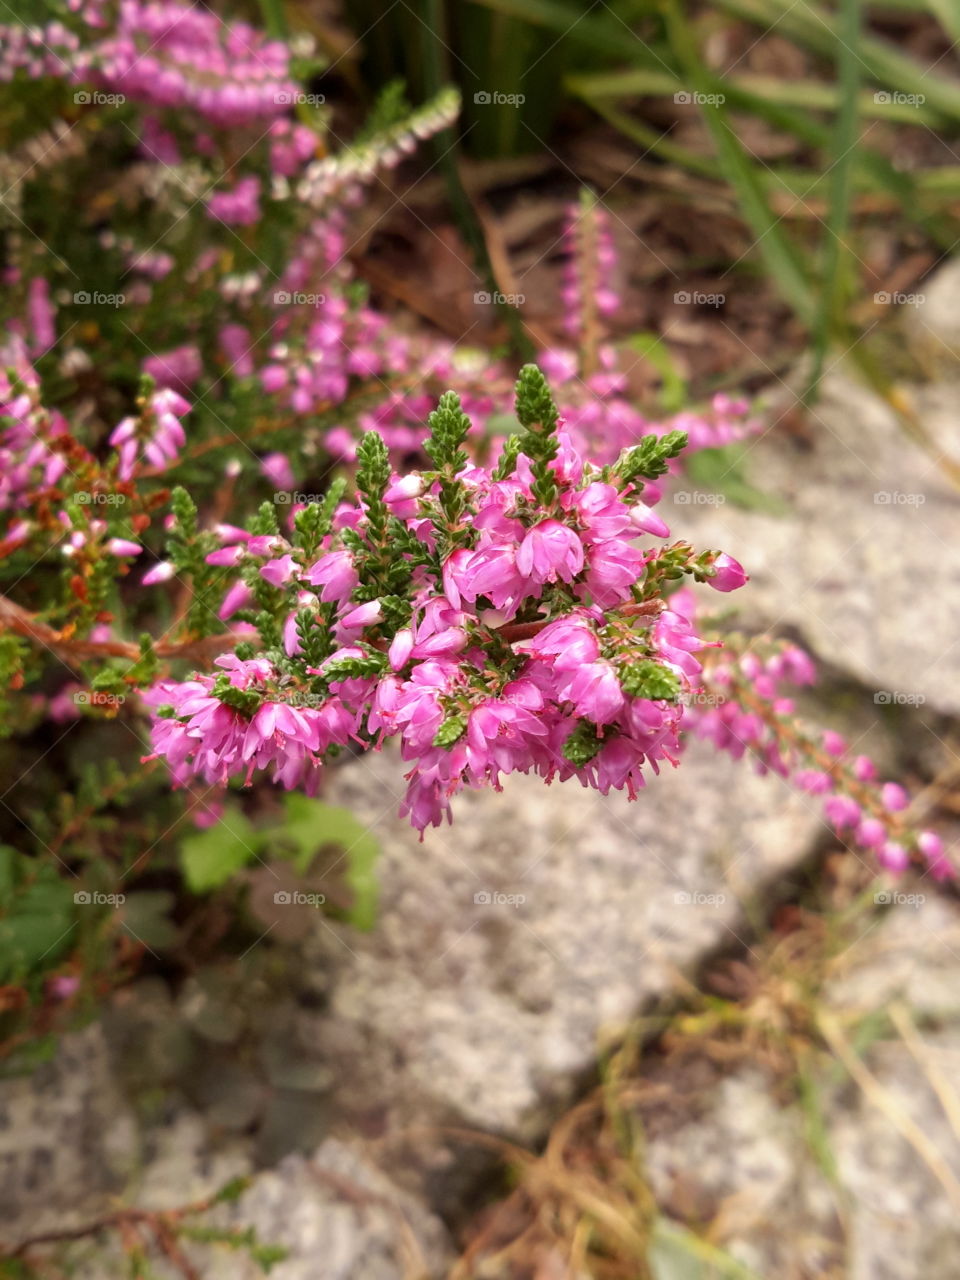 Very small pink flowers